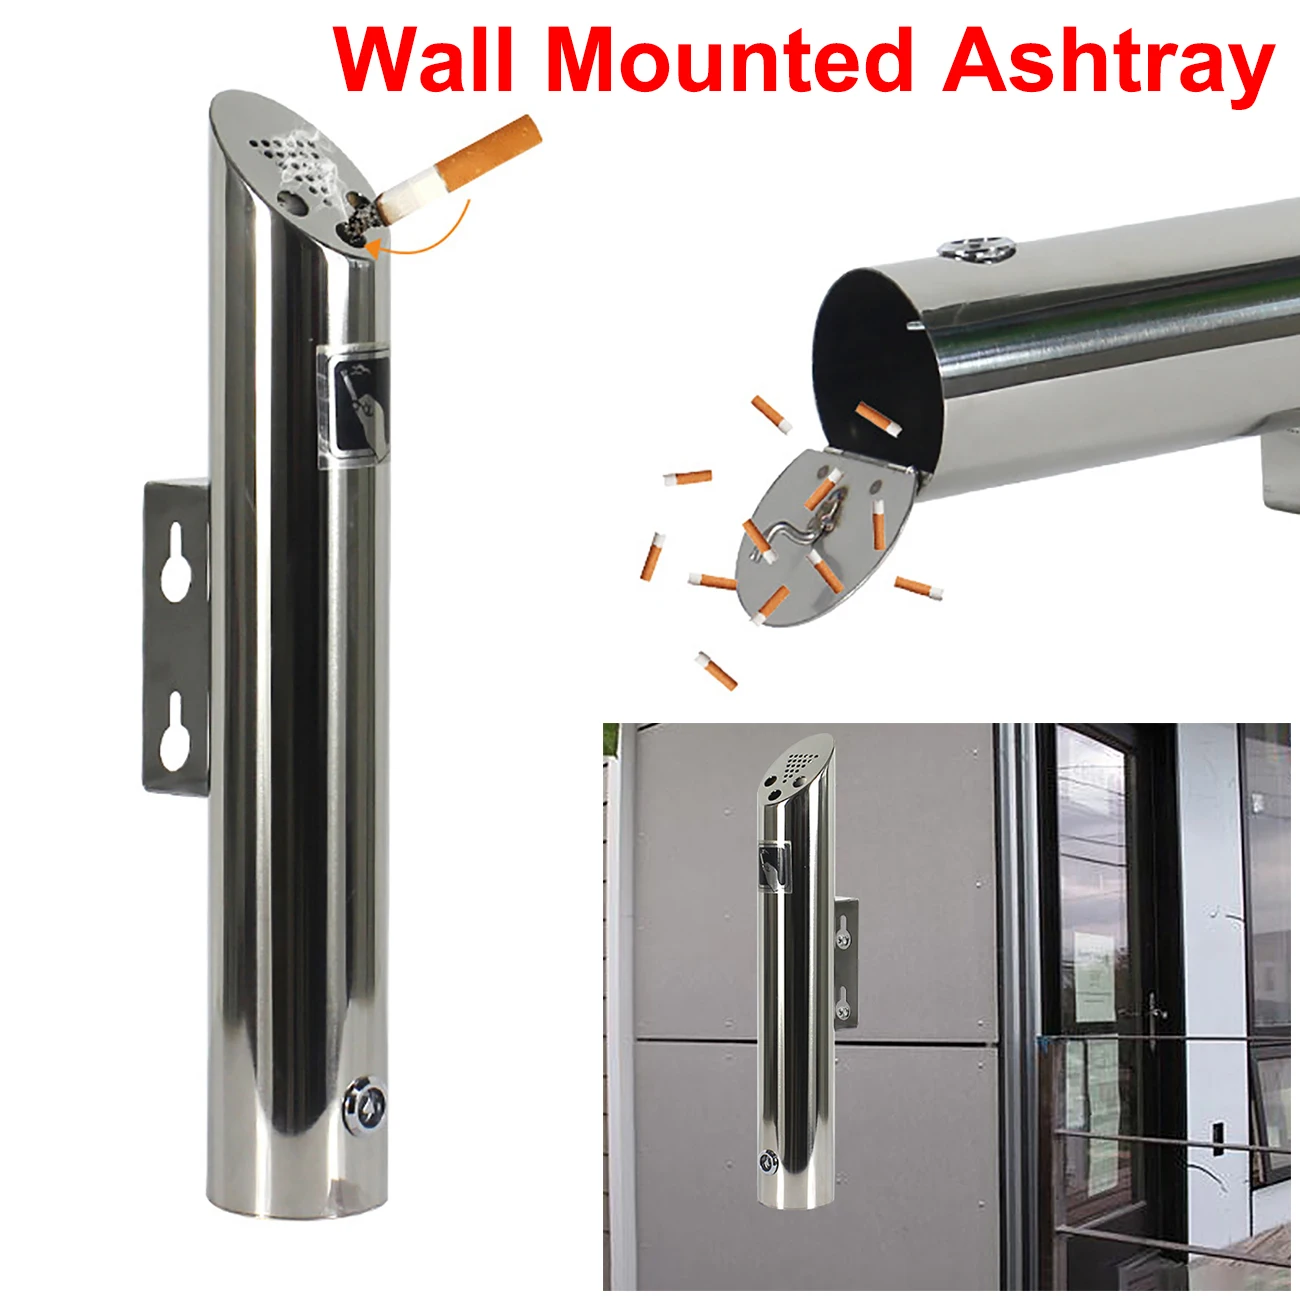 Stainless Steel Public Wall-mounted Ashtray Outdoor Cylinder Ashtray Cigarette Ash Bin for Hotels Shopping Malls Street Clubs